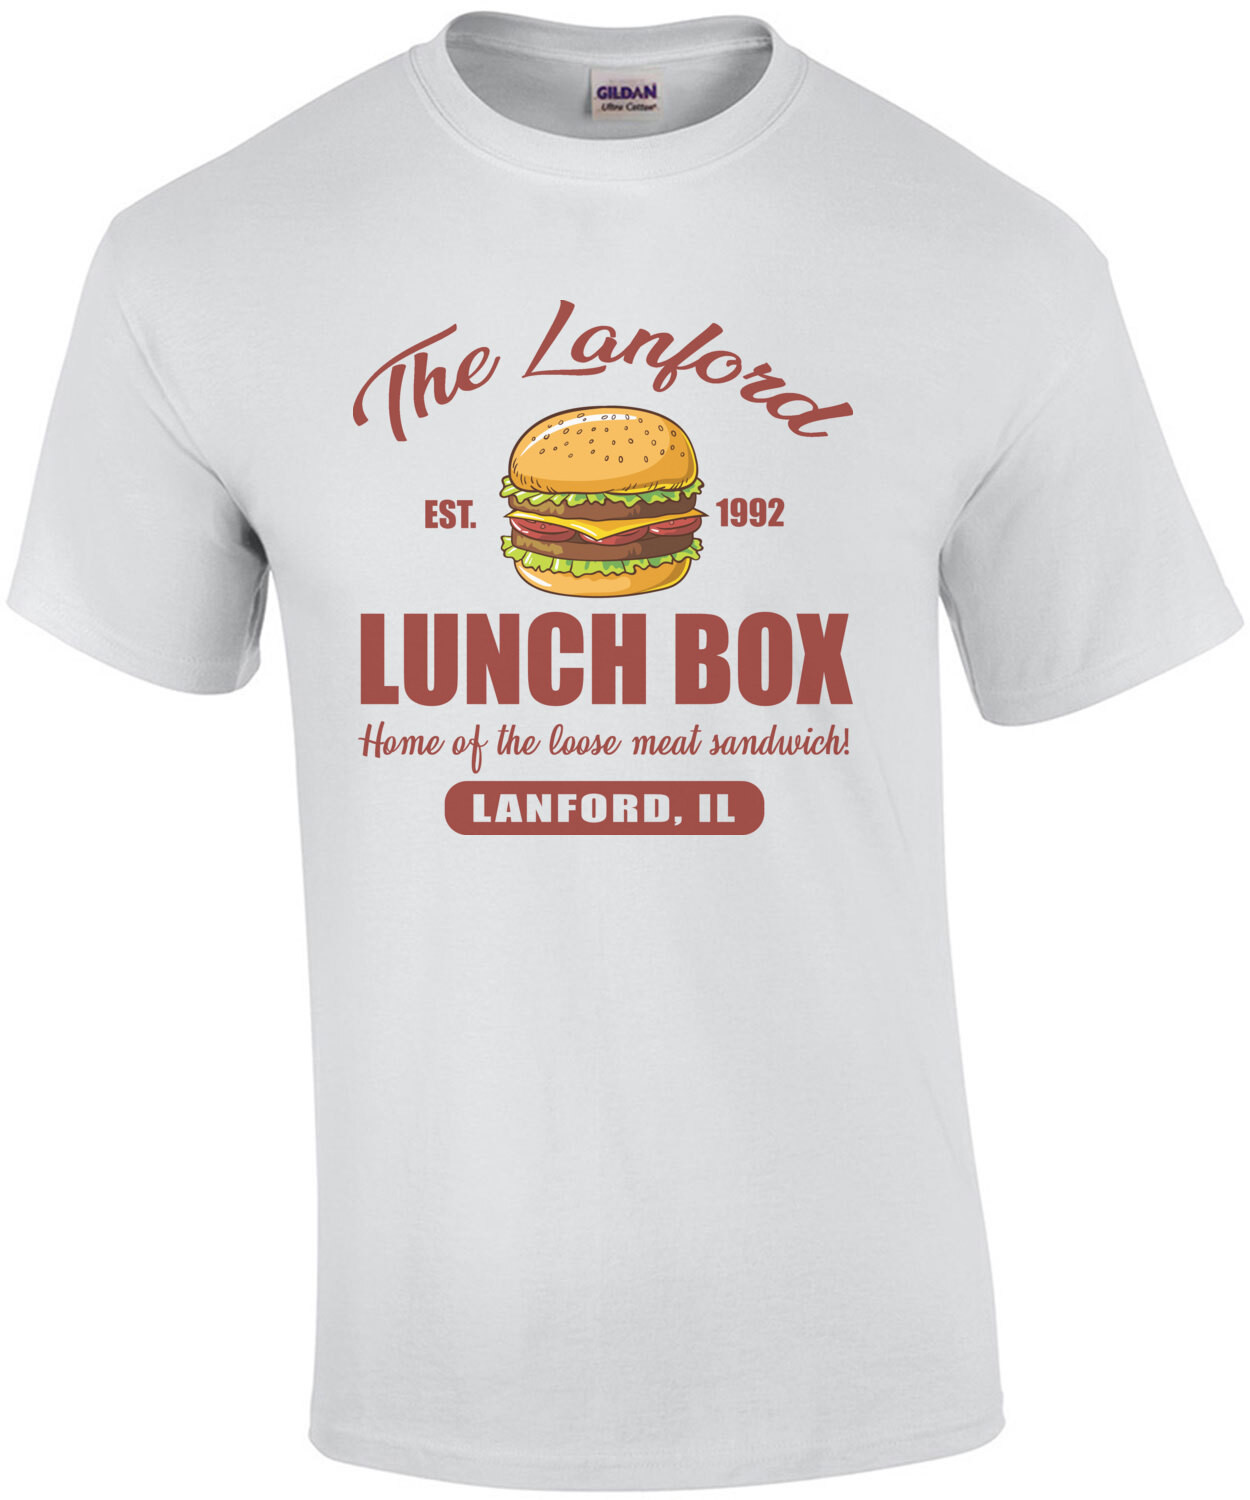 The Lanford Lunch Box - Home of the loose meat sandwich - Roseanne 80's T-Shirt